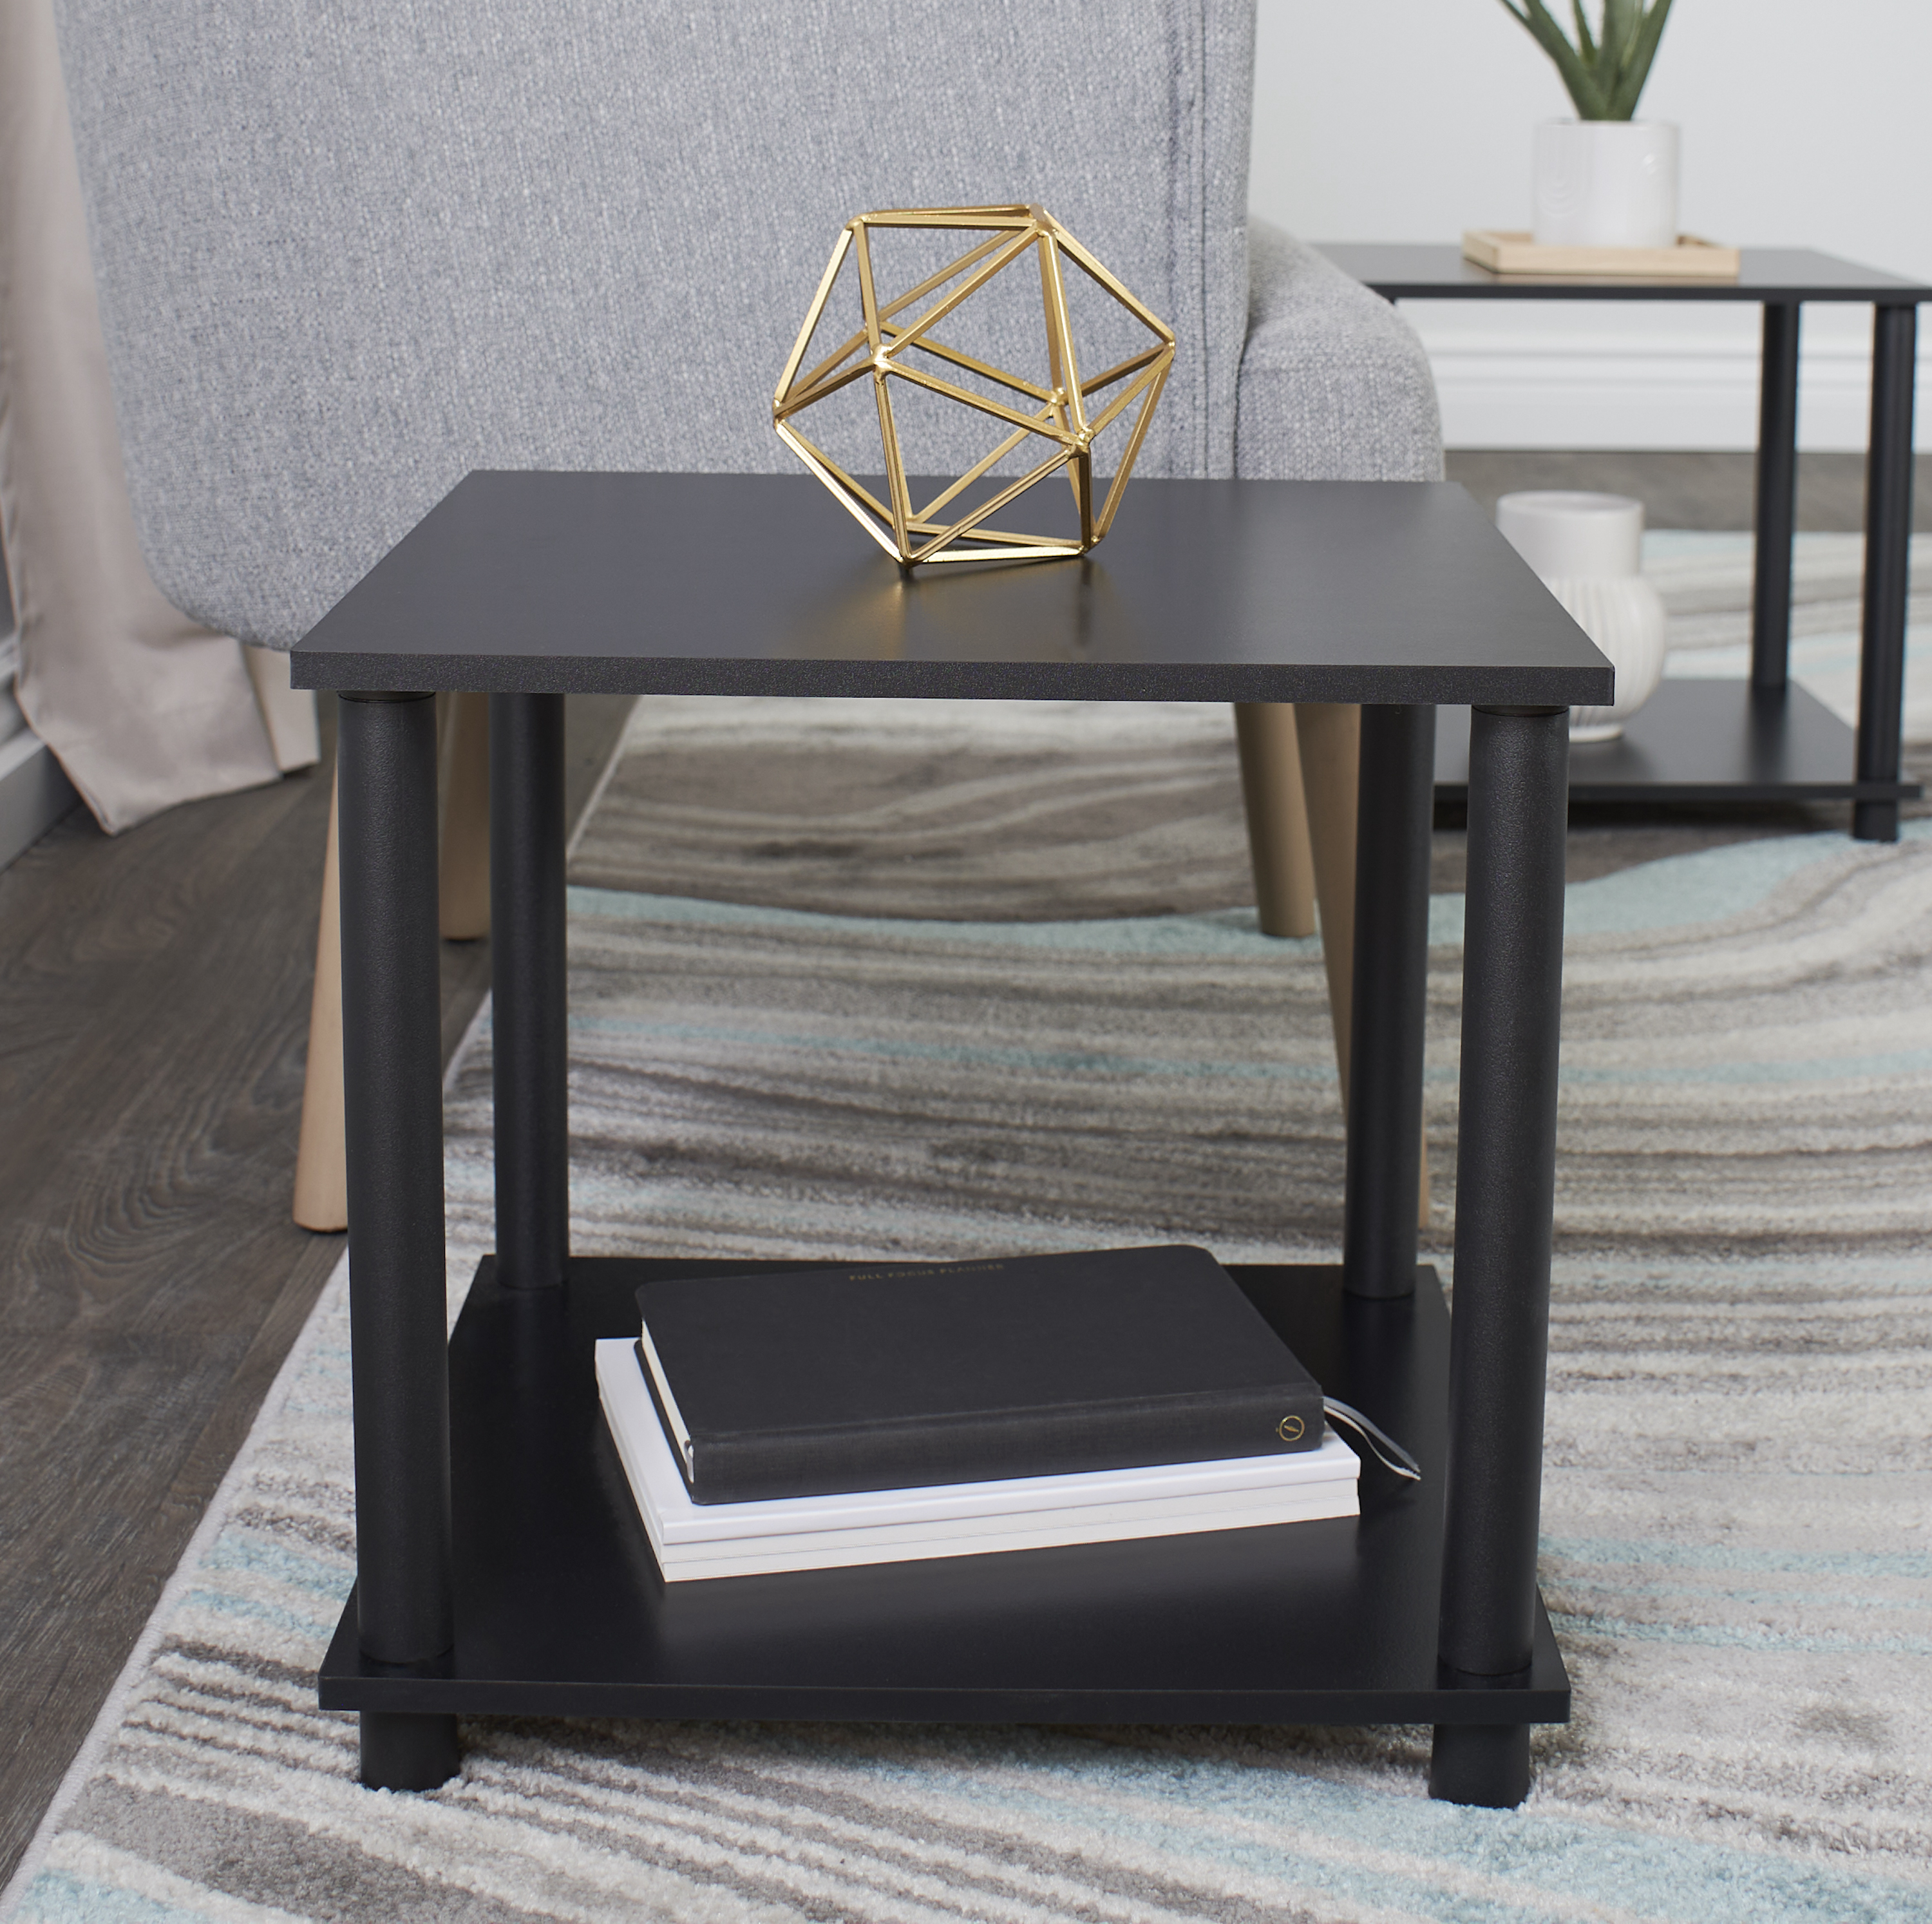 Mainstays No Tools End Tables, Solid Black, Set of 2 - image 3 of 8